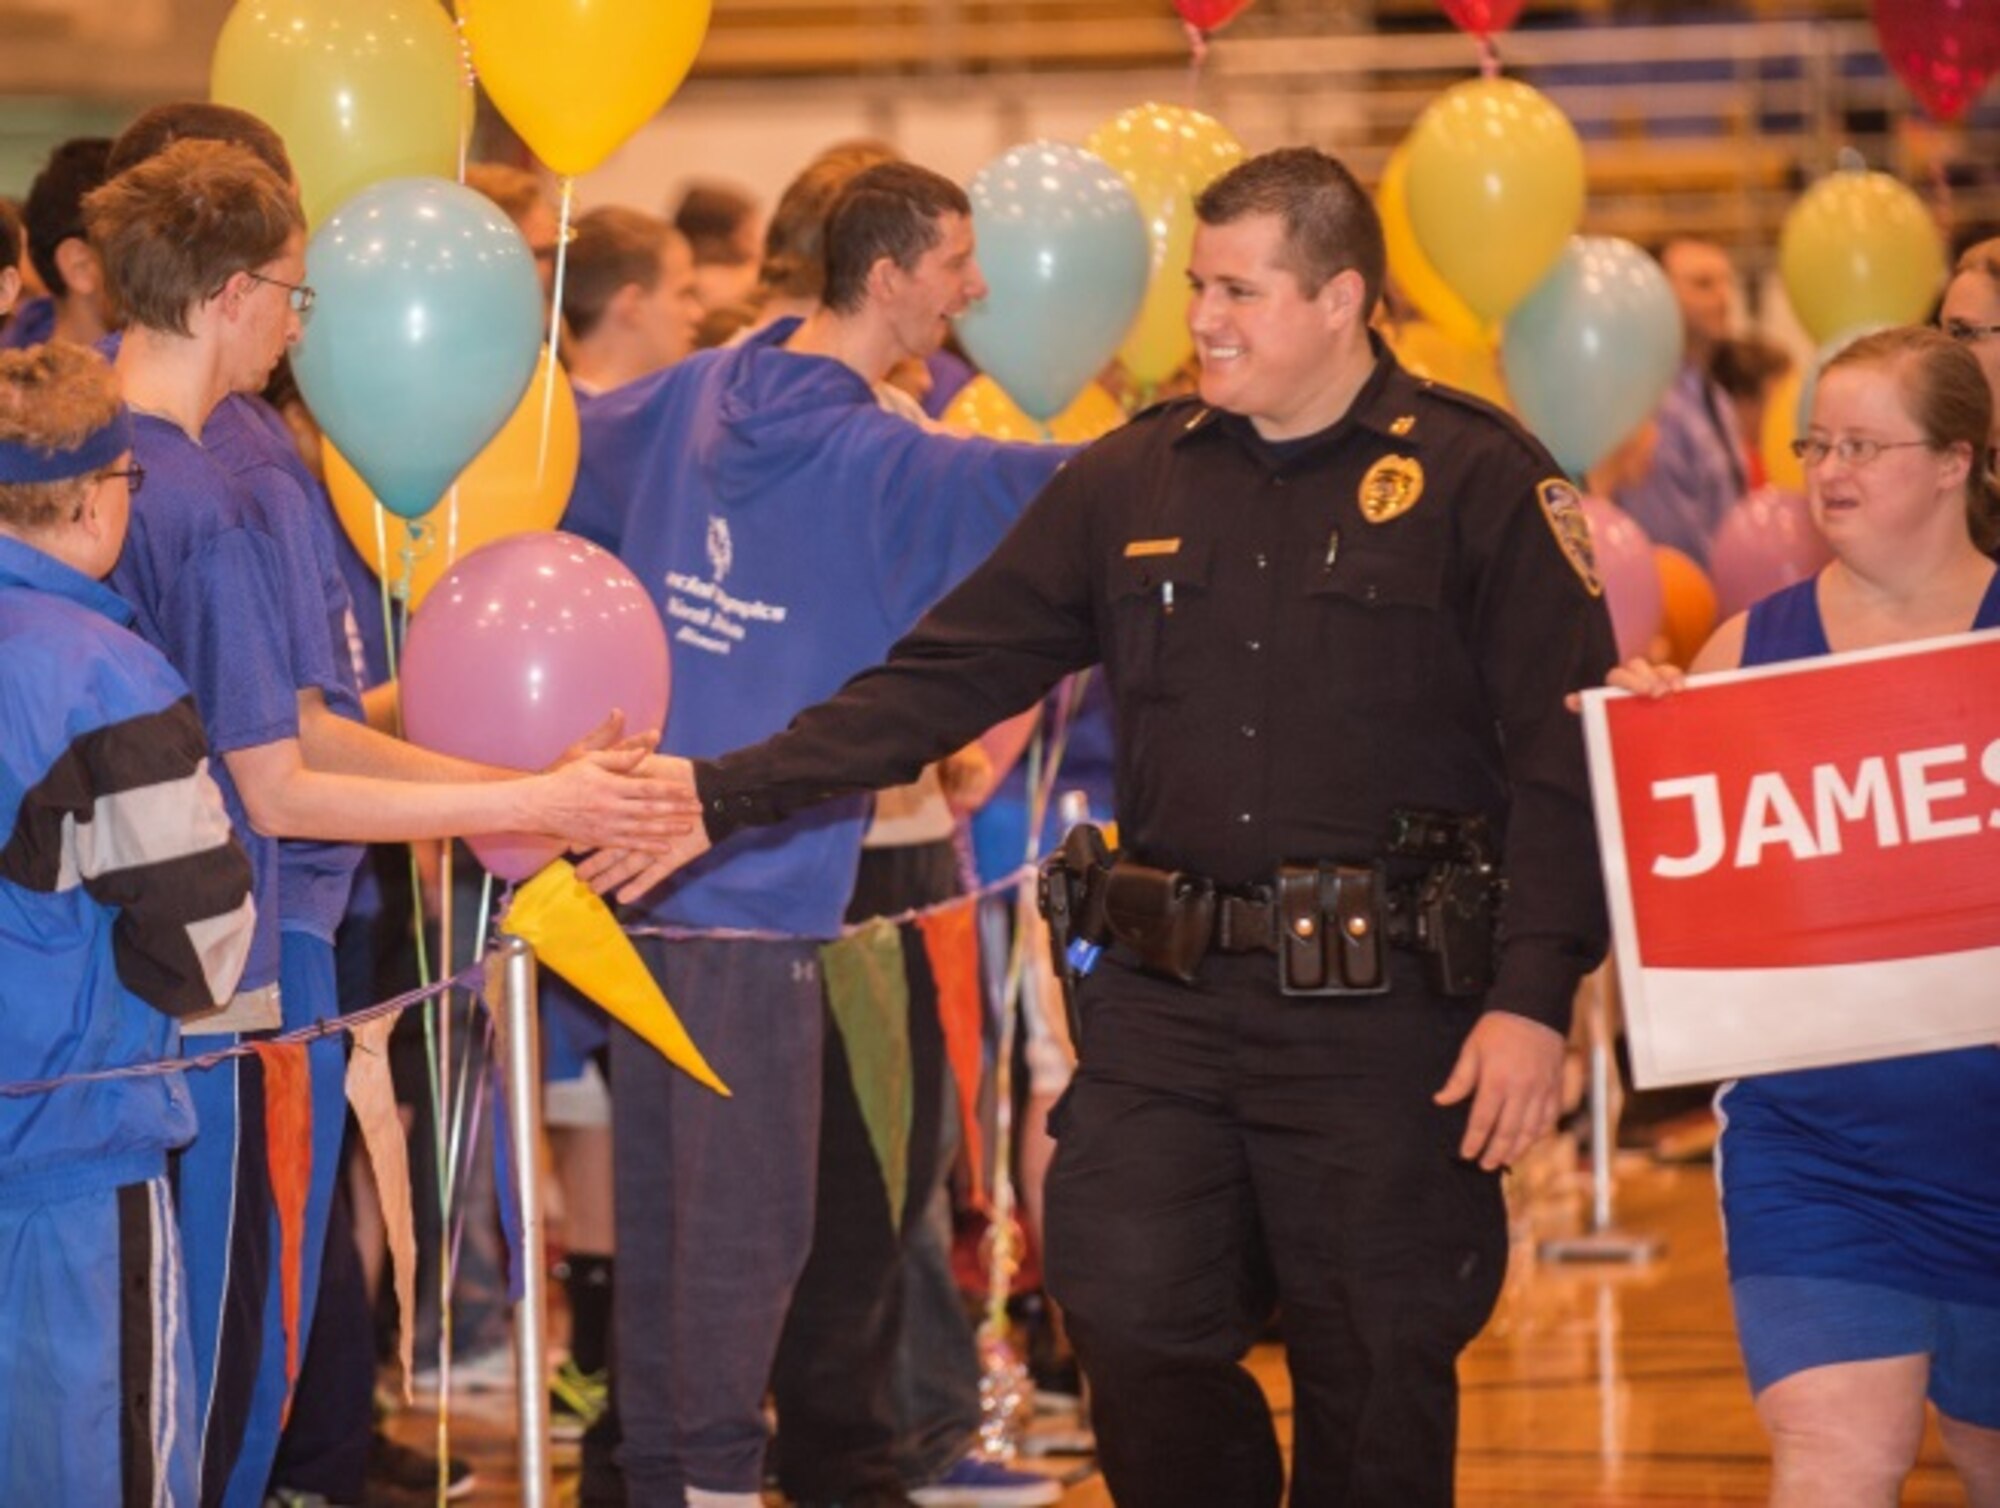 A member of the Minot Police Department high-fives participants in the North Dakota Special Olympics in Minot, N.D., March 4, 2016. Many members of the Minot community showed their support at the event. (U.S. Air Force photo/Airman 1st Class Christian Sullivan)